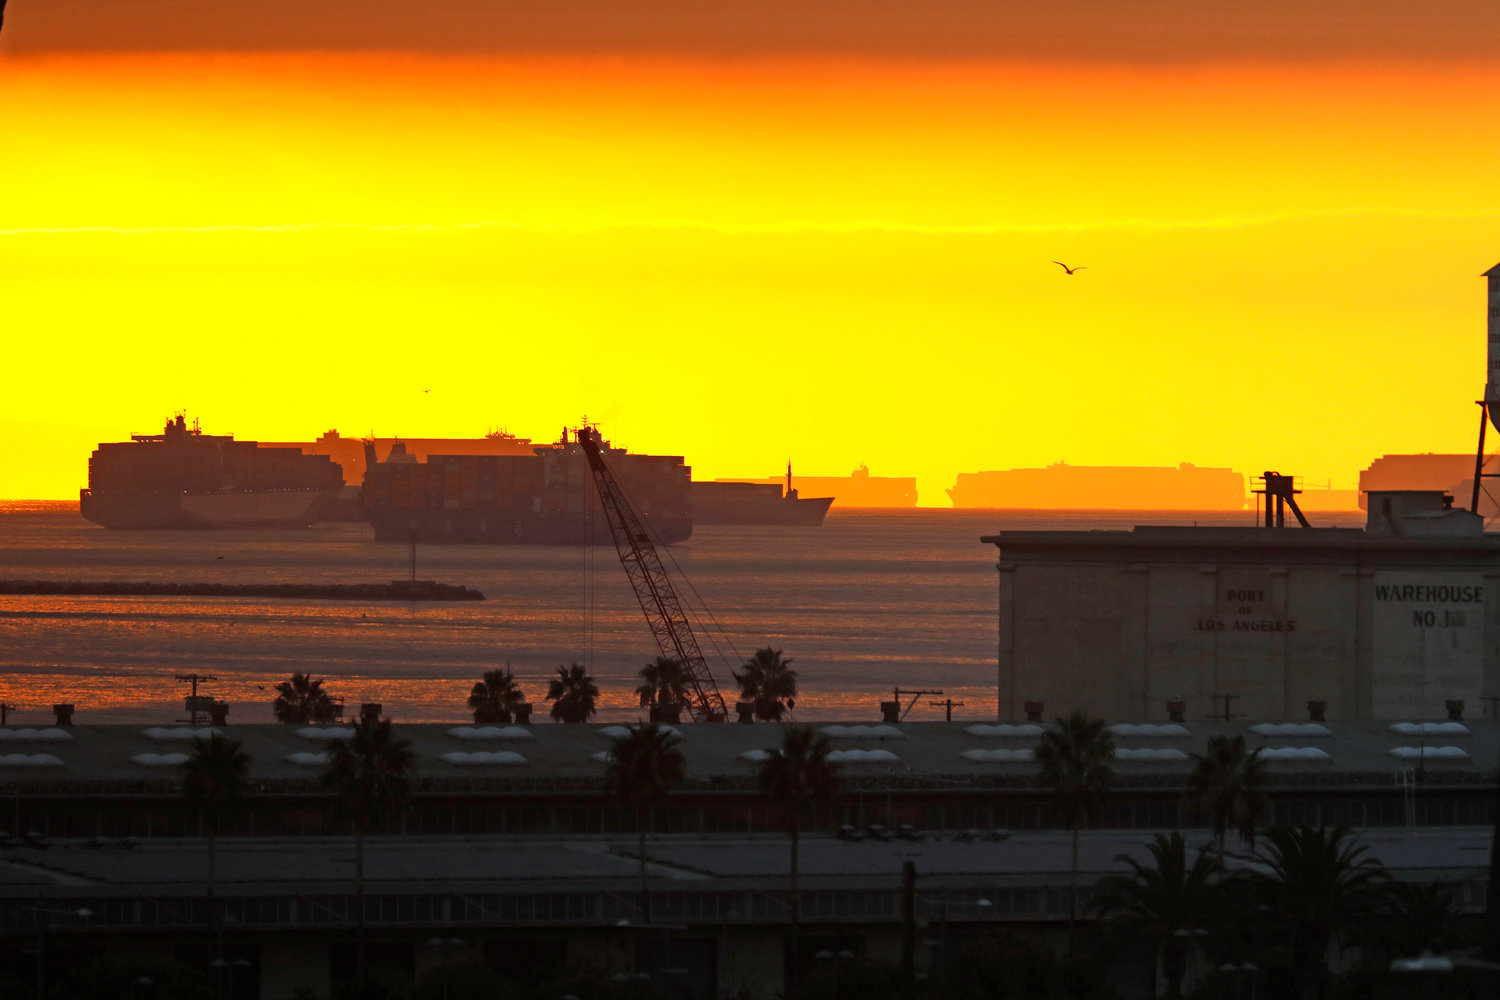 Cargo ships are backed up waiting to unload in the Port of Los Angeles and Port of Long Beach on Nov. 17, 2021. (Carolyn Cole/Los Angeles Times/TNS)